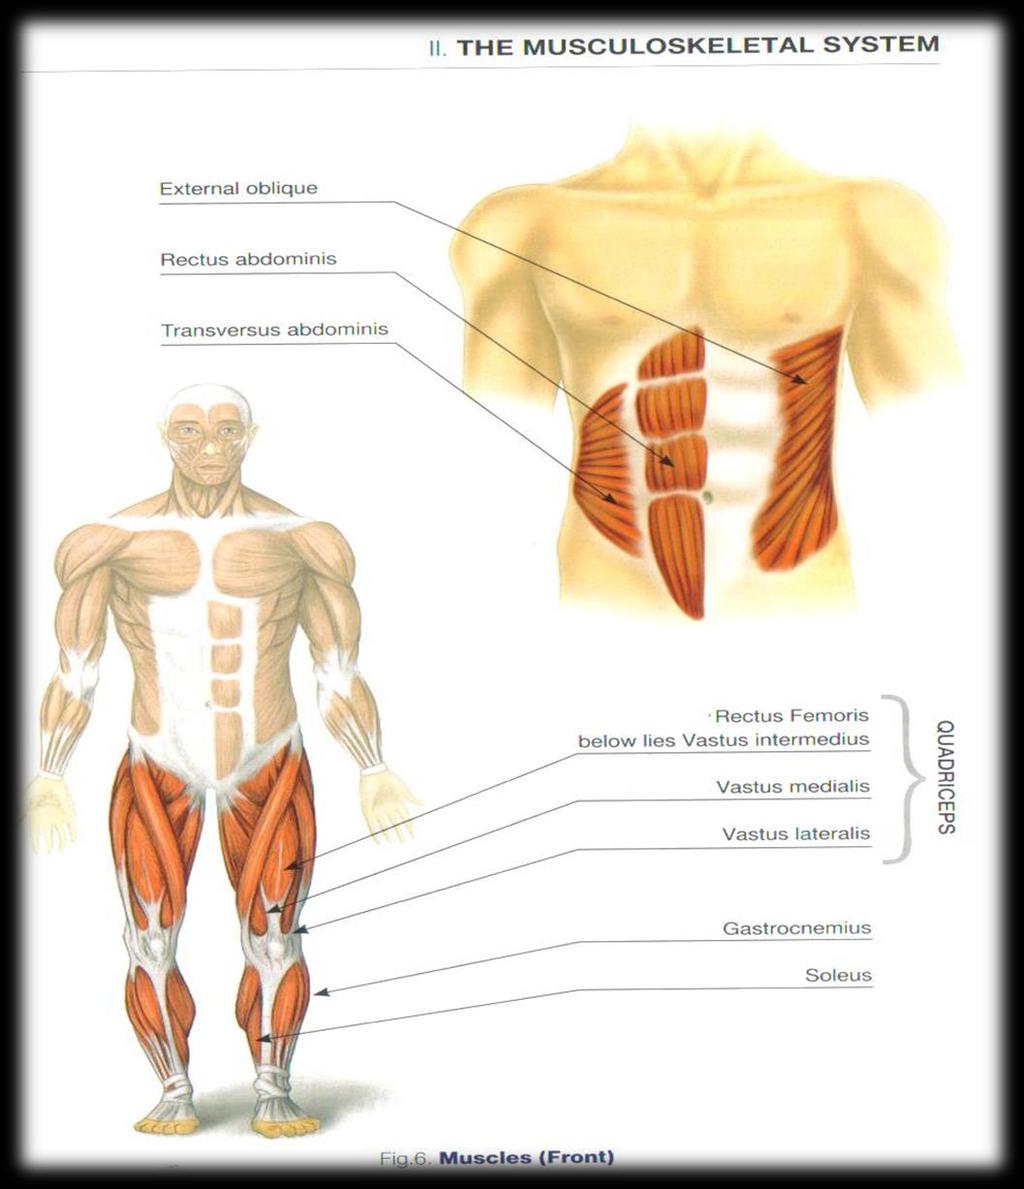 MUSCLES The back muscles provide the power for movement in the spine The abdominal muscles also